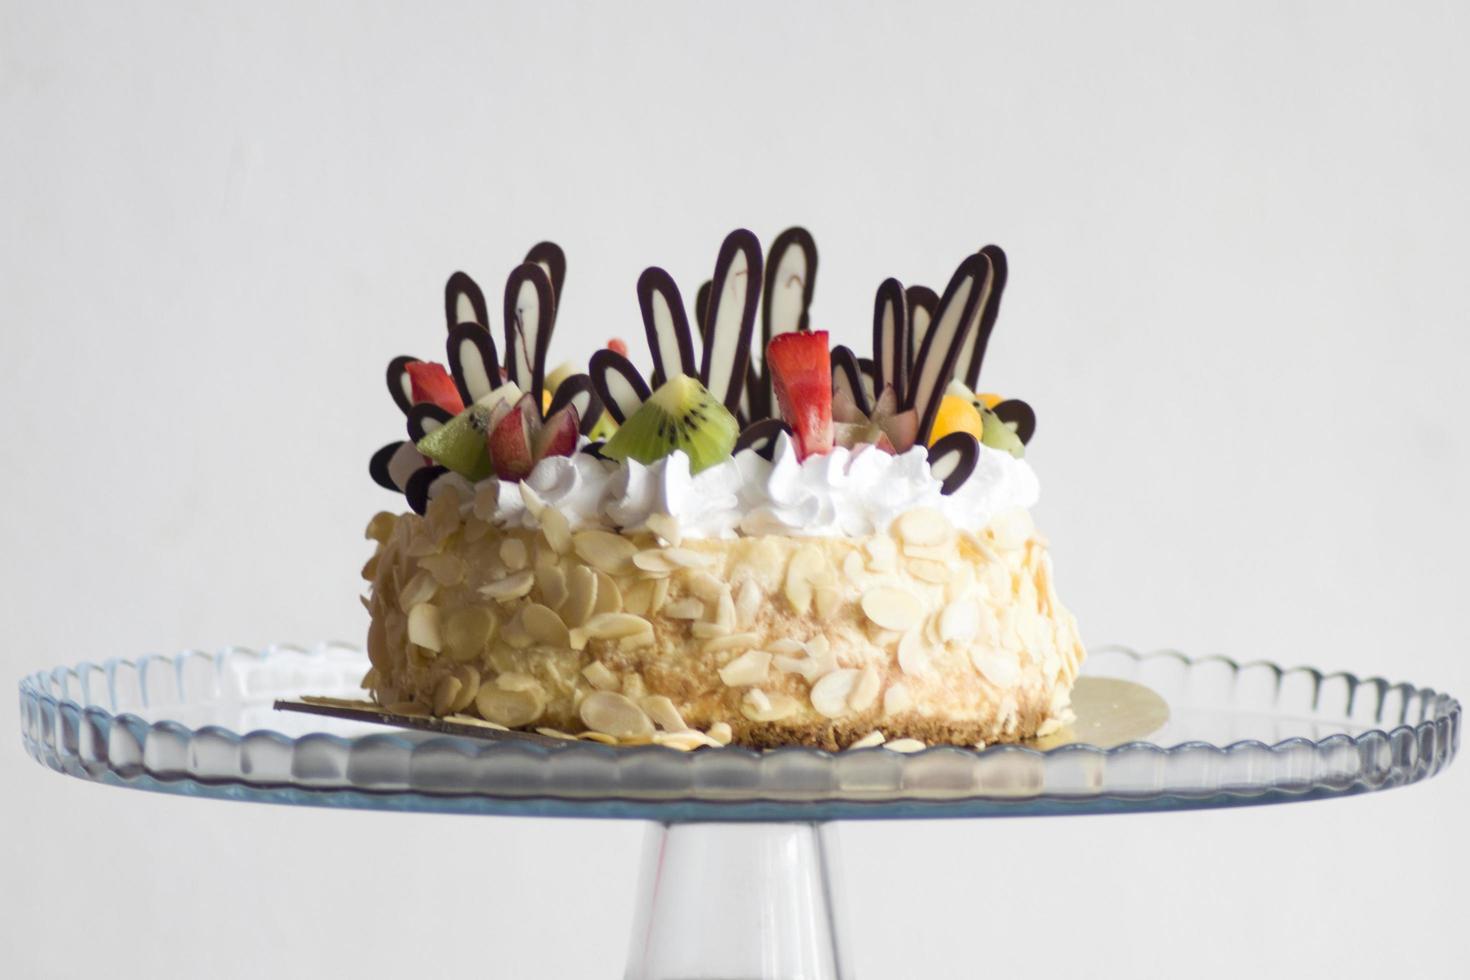 Brown and white icing covered cake with fruit photo